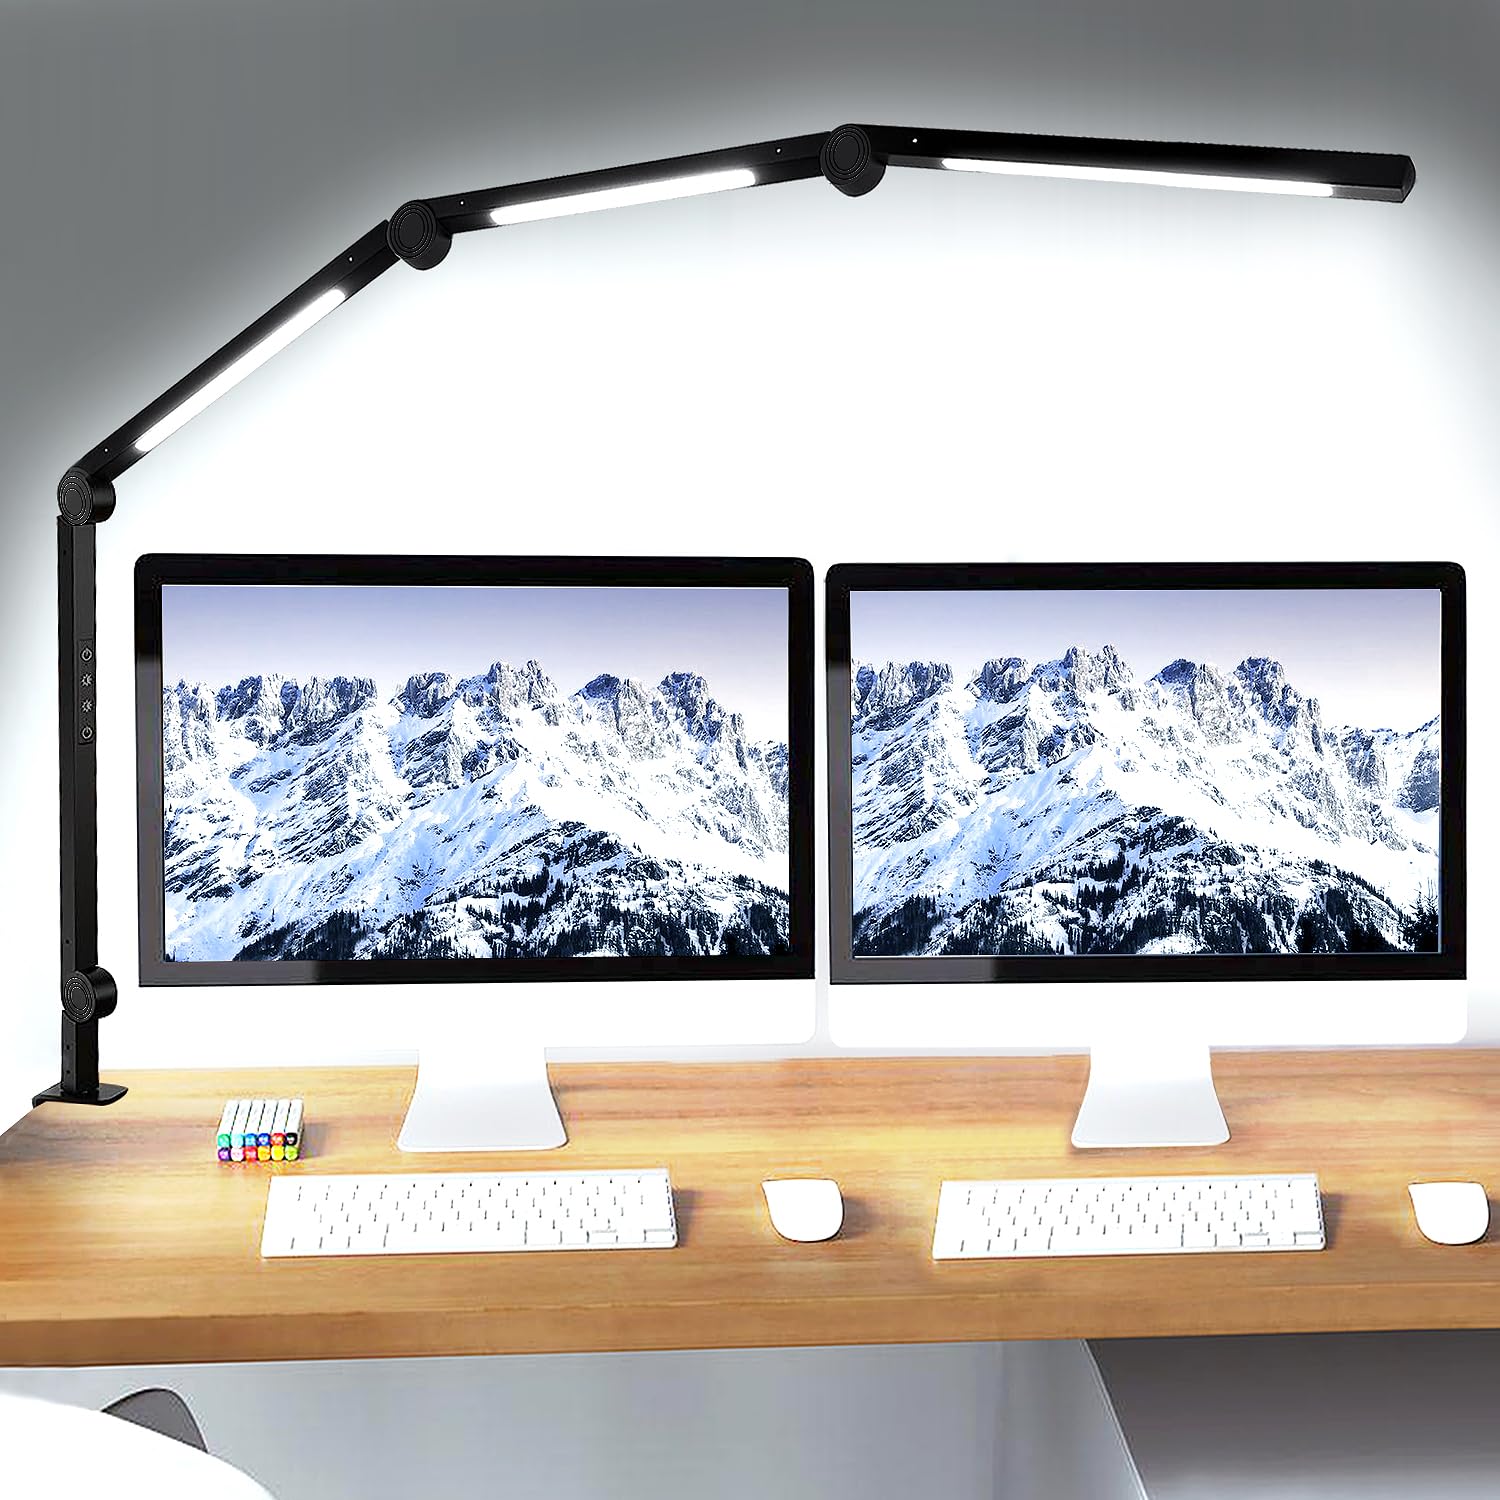 vimeepro LED Desk Lamp with Clamp Flexible 4 sections Swing Arm Three light sources desk light, 4 Color Modes & 5 Brightness, Ey